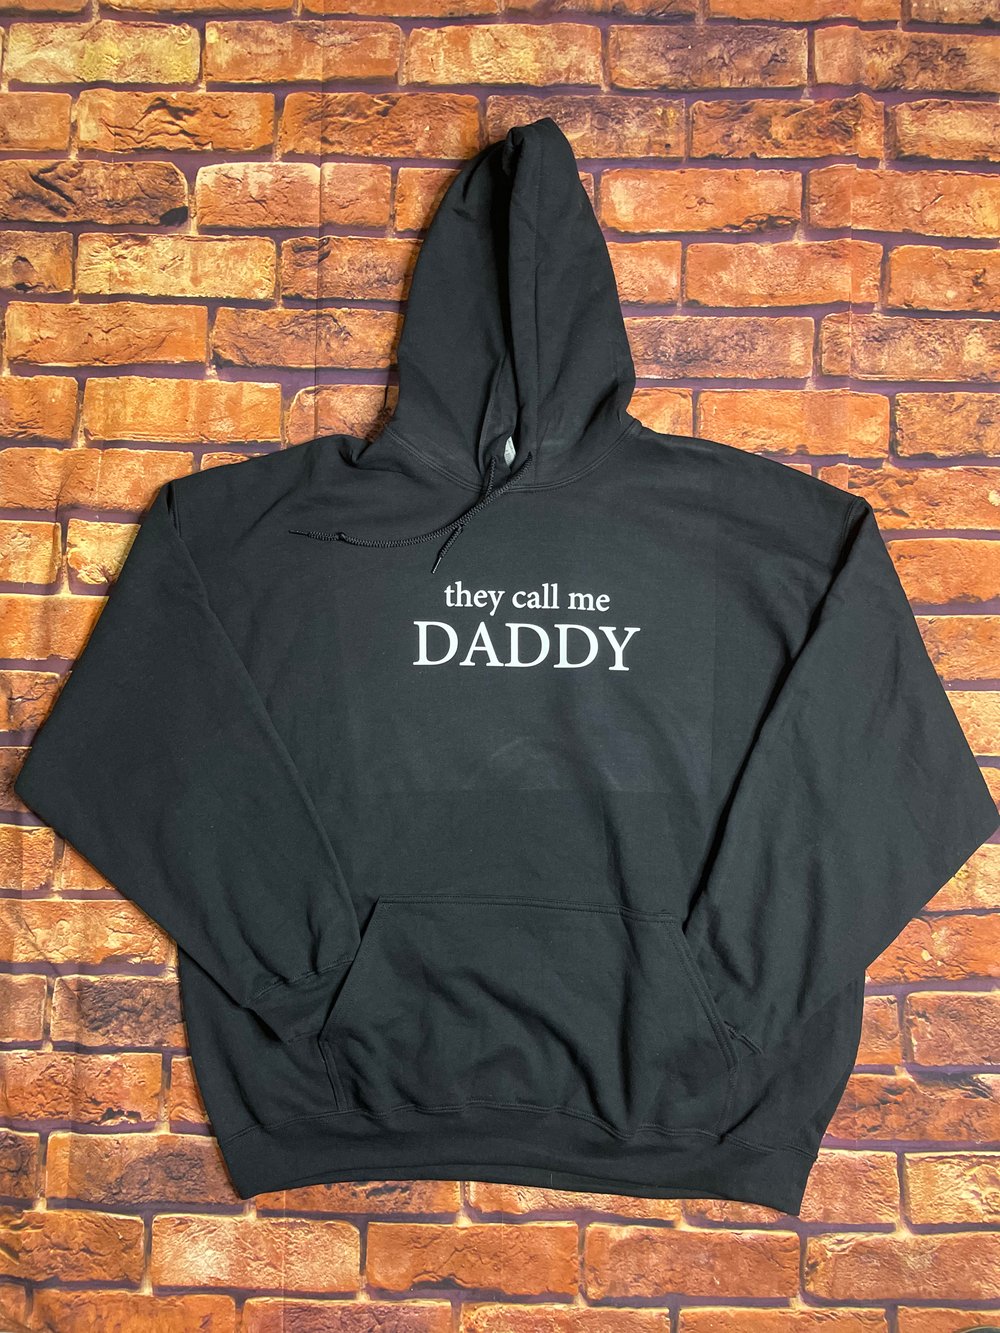 They call me daddy hoodie - multiple colors